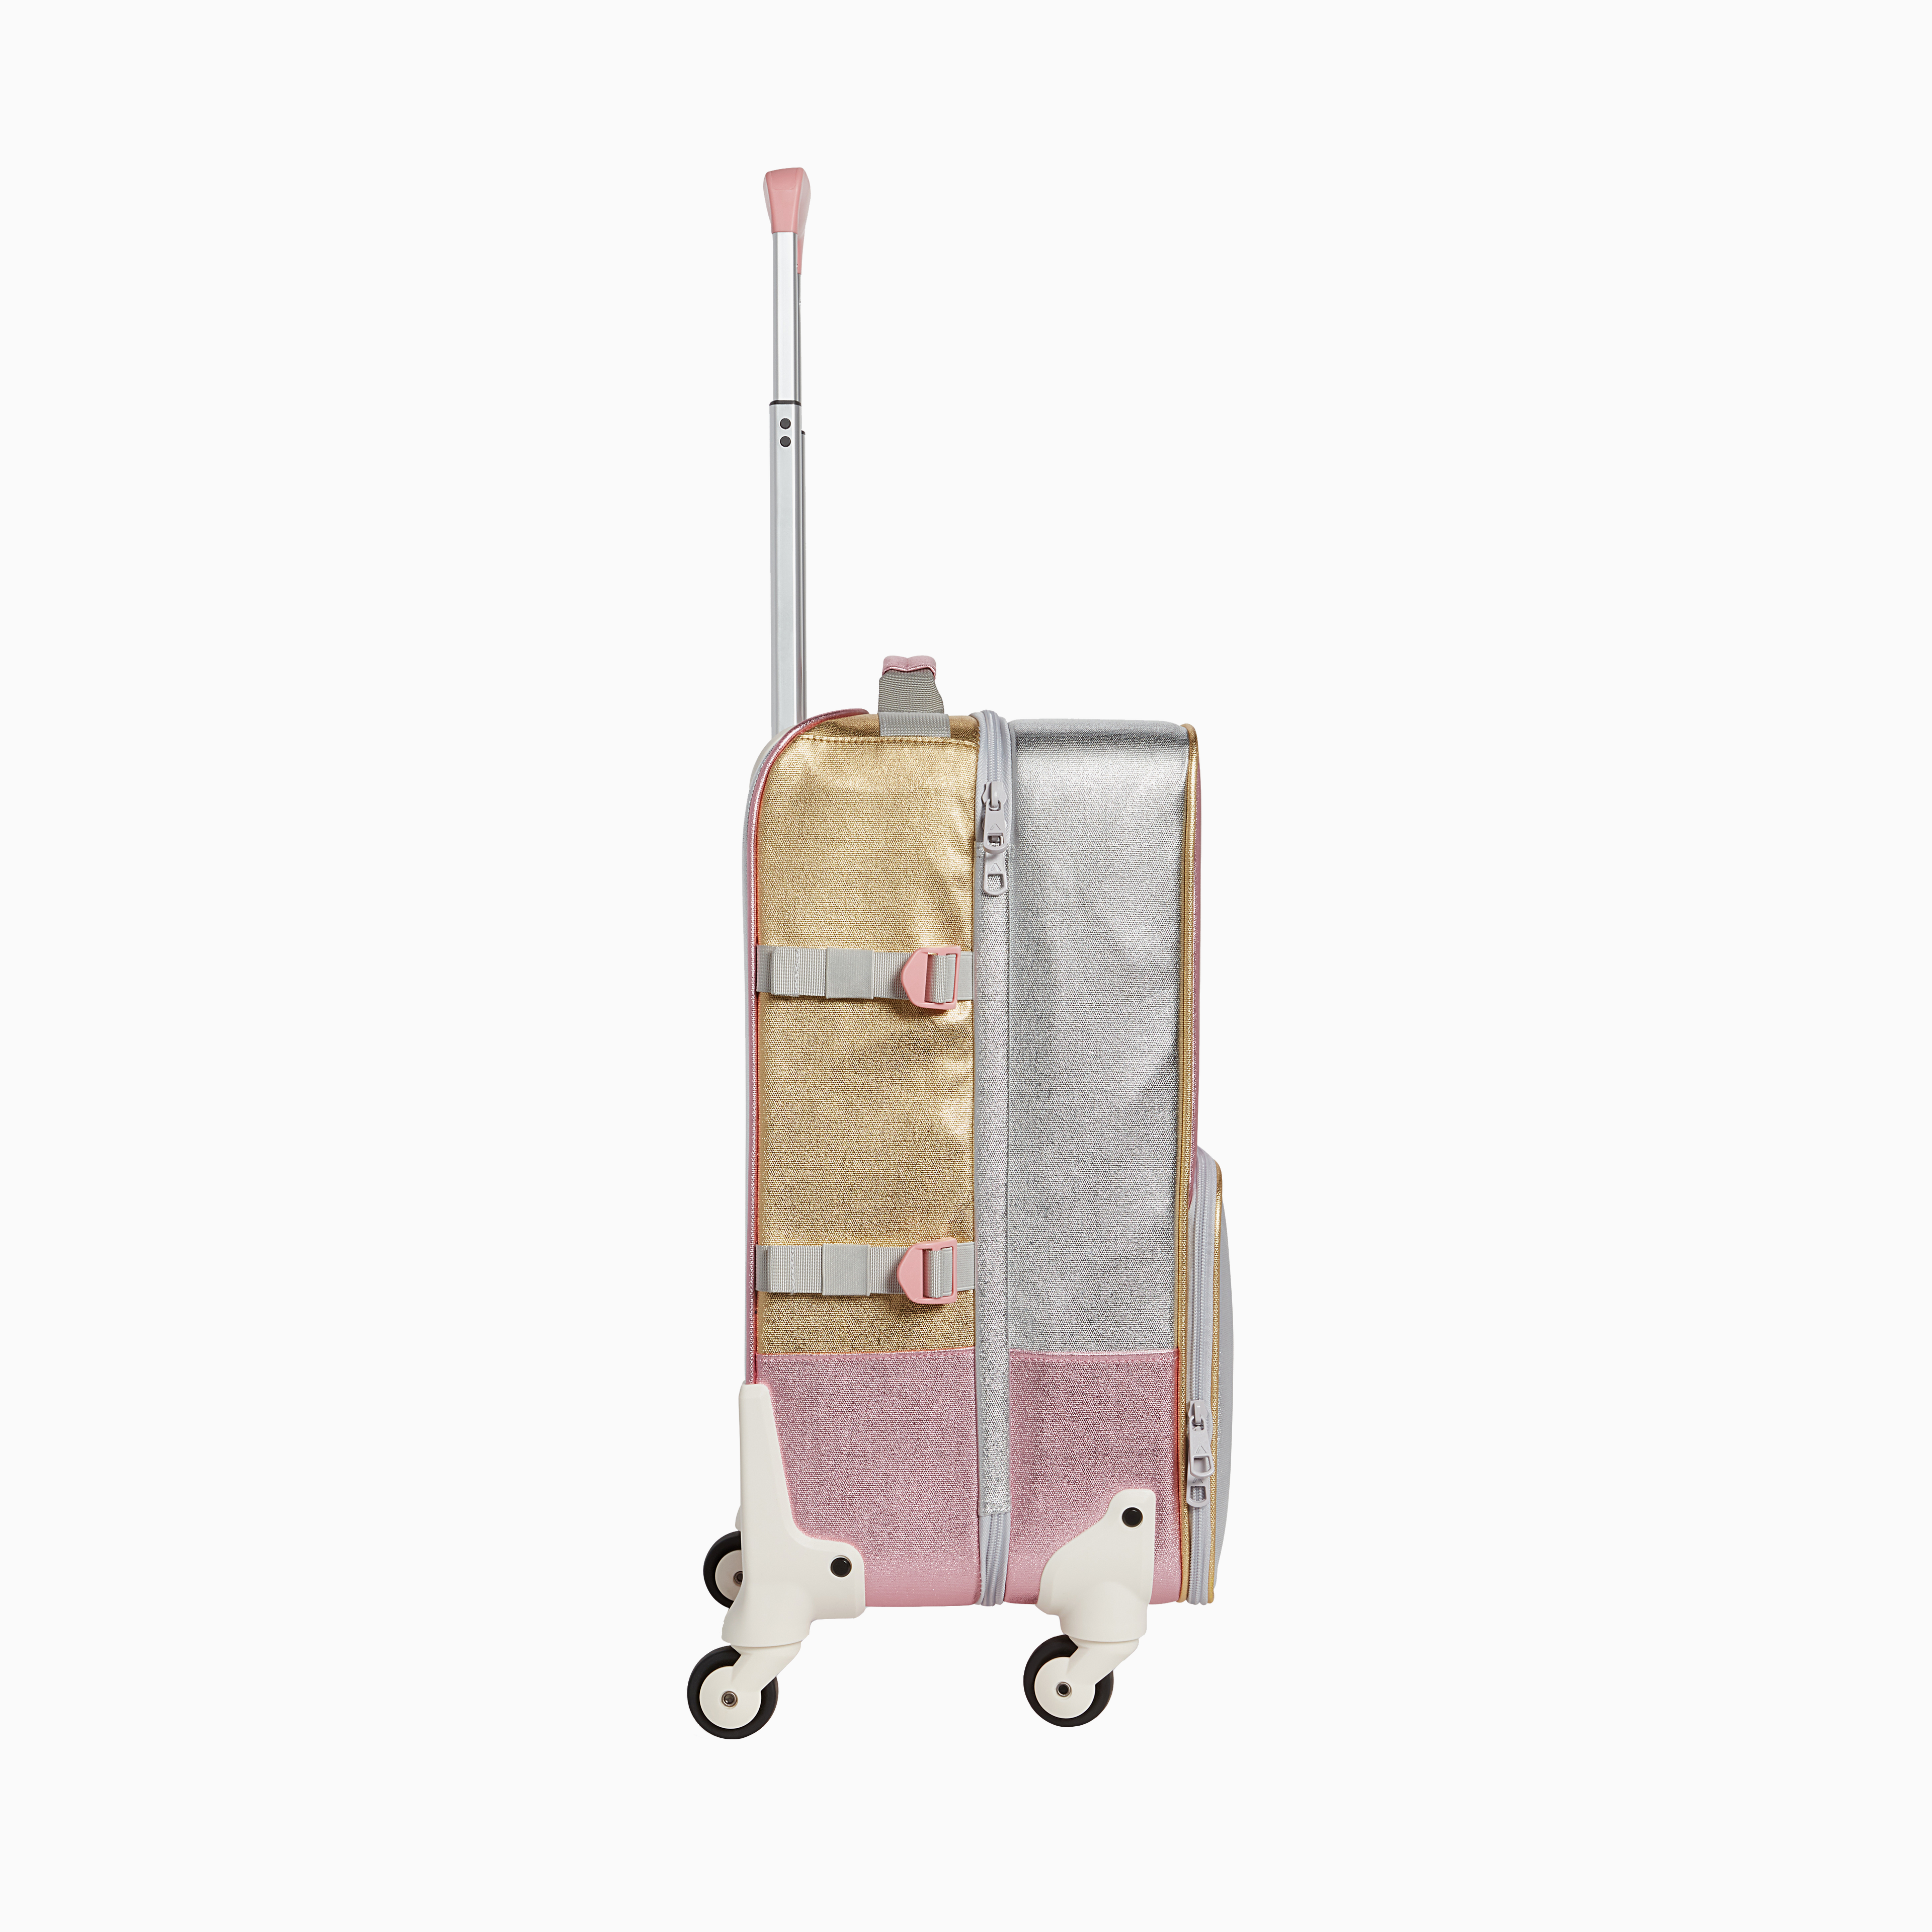 Logan Carry-On Suitcase